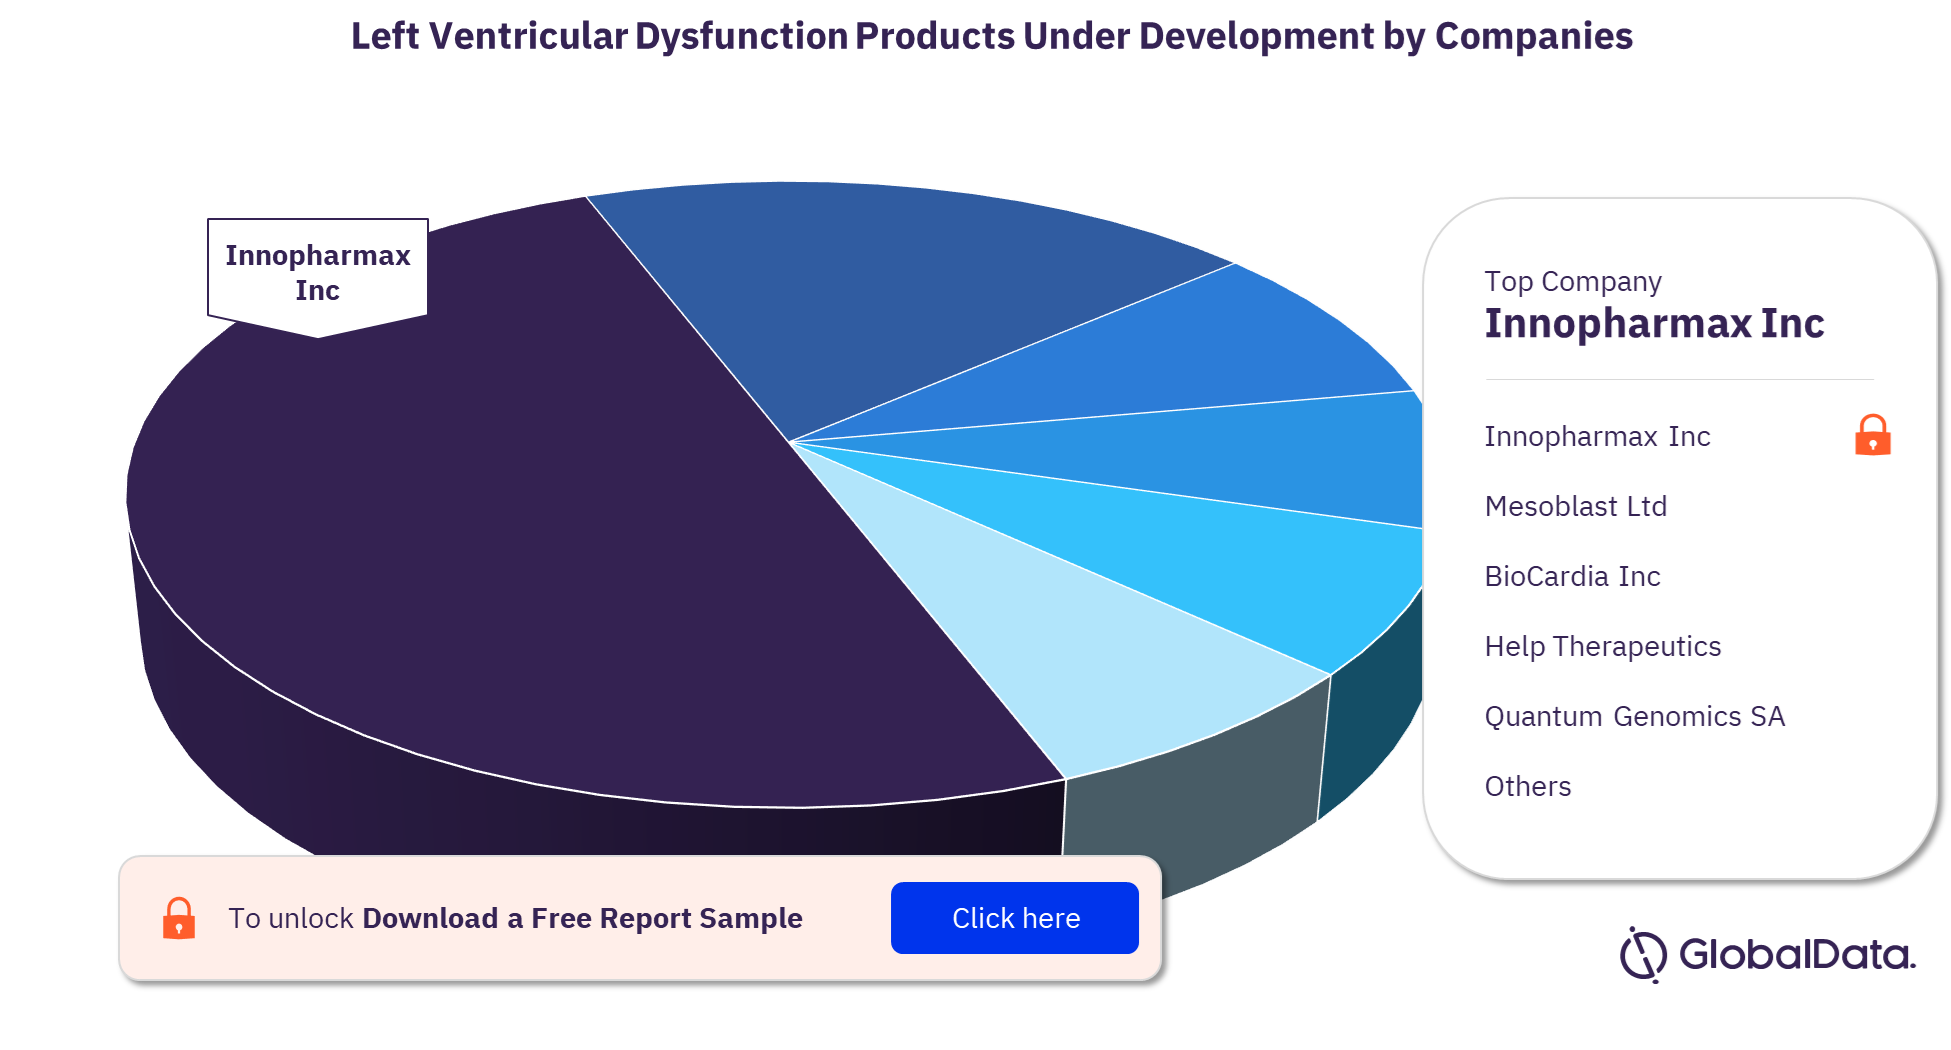 Left Ventricular Dysfunction Pipeline Products by Companies